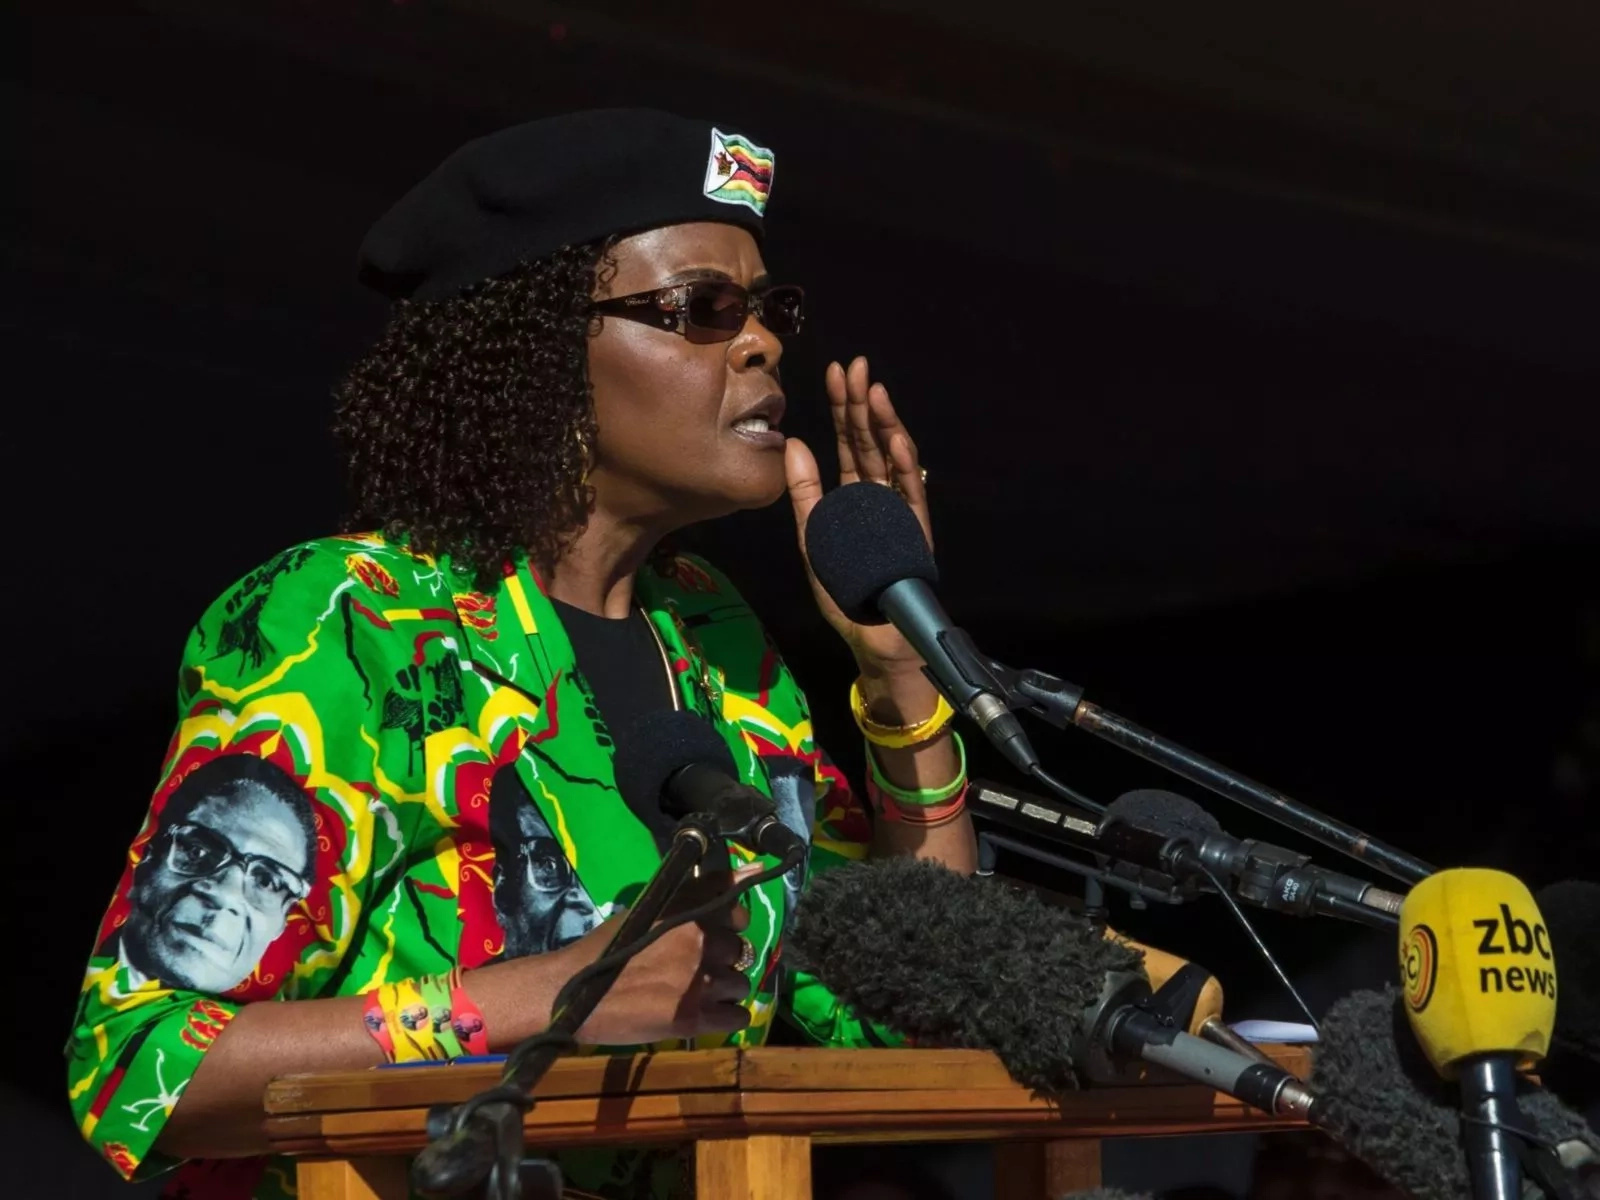 Just in: Mugabe's wife leaves Zimbabwe as military takes over Harare